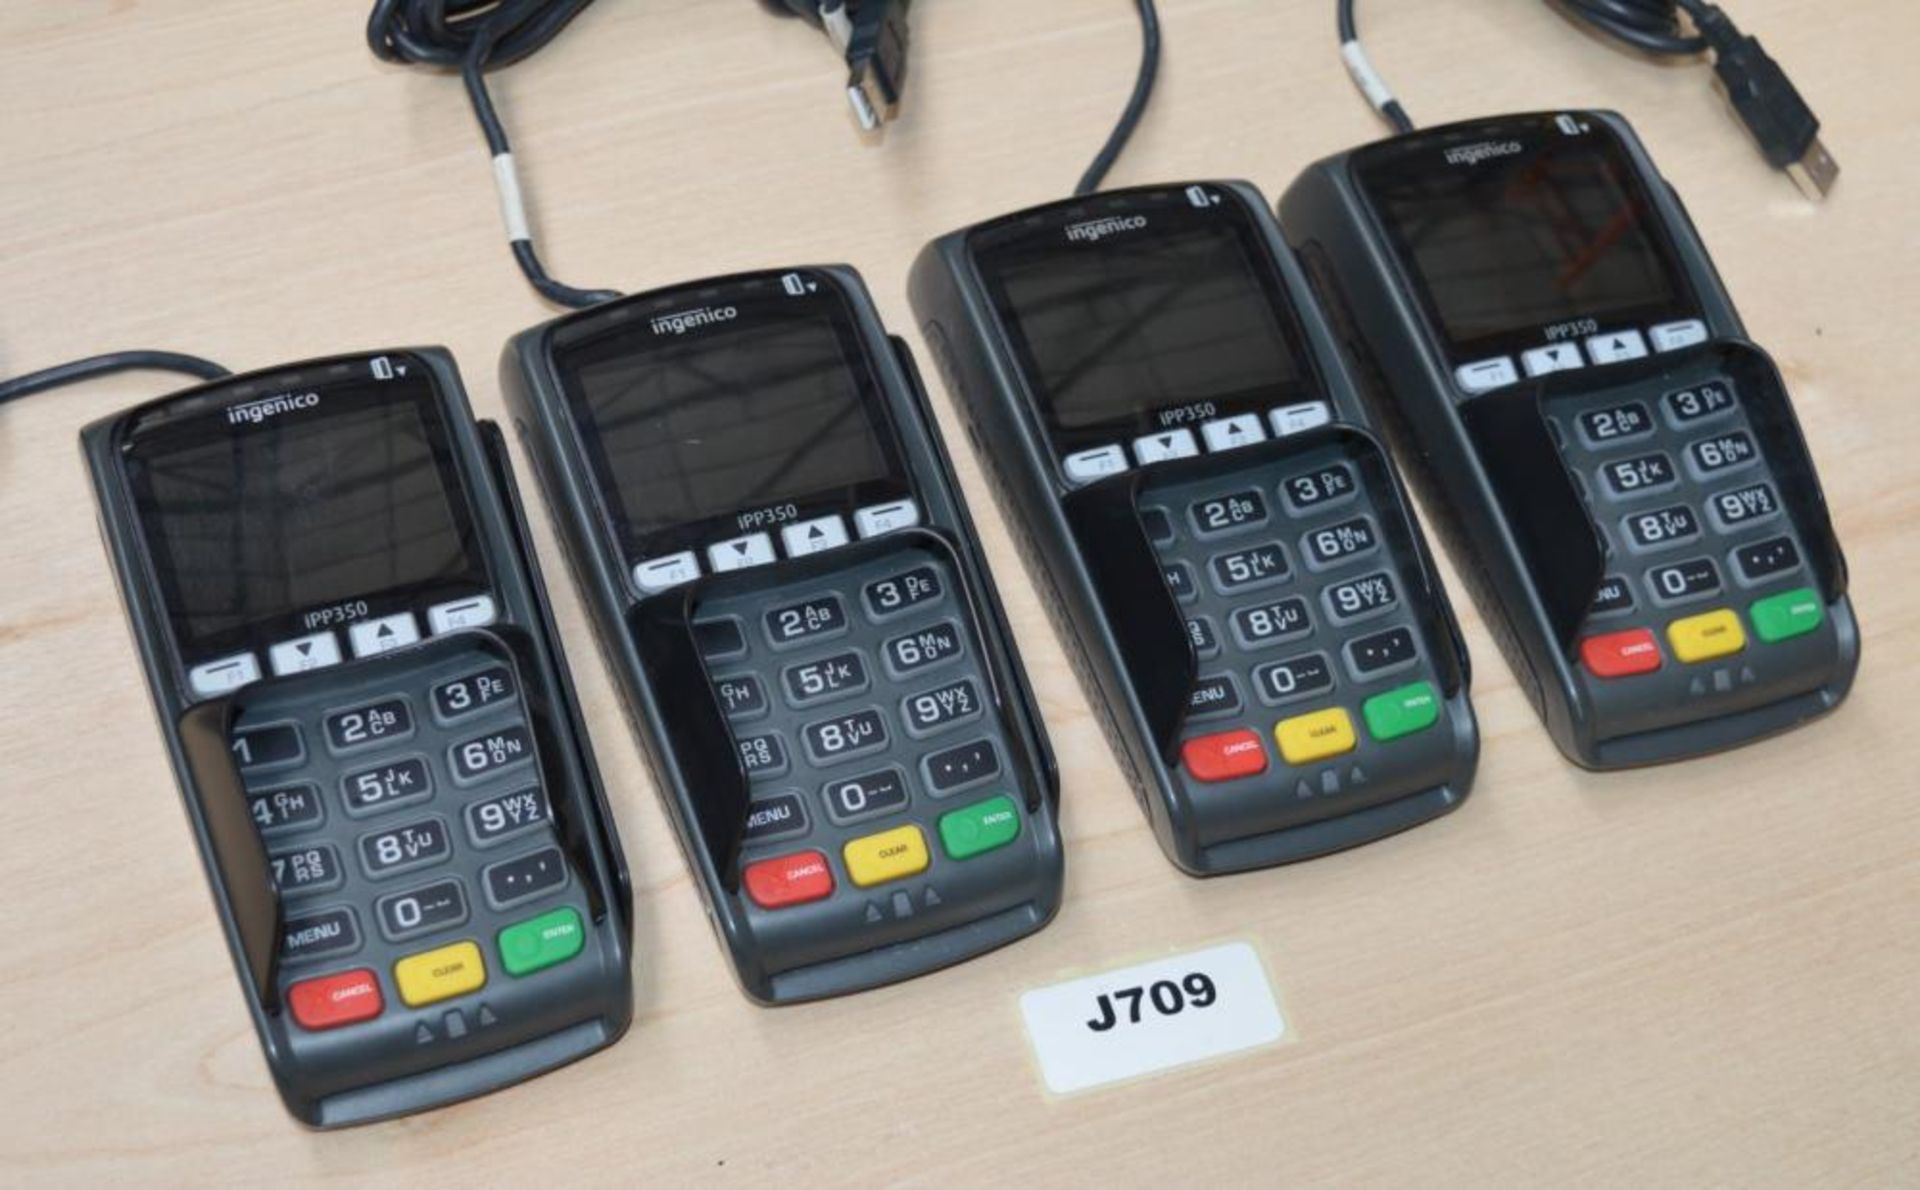 4 x Ingenico iPP350 Payment Terminal Devices - Removed From Working Environments in Good Condition a